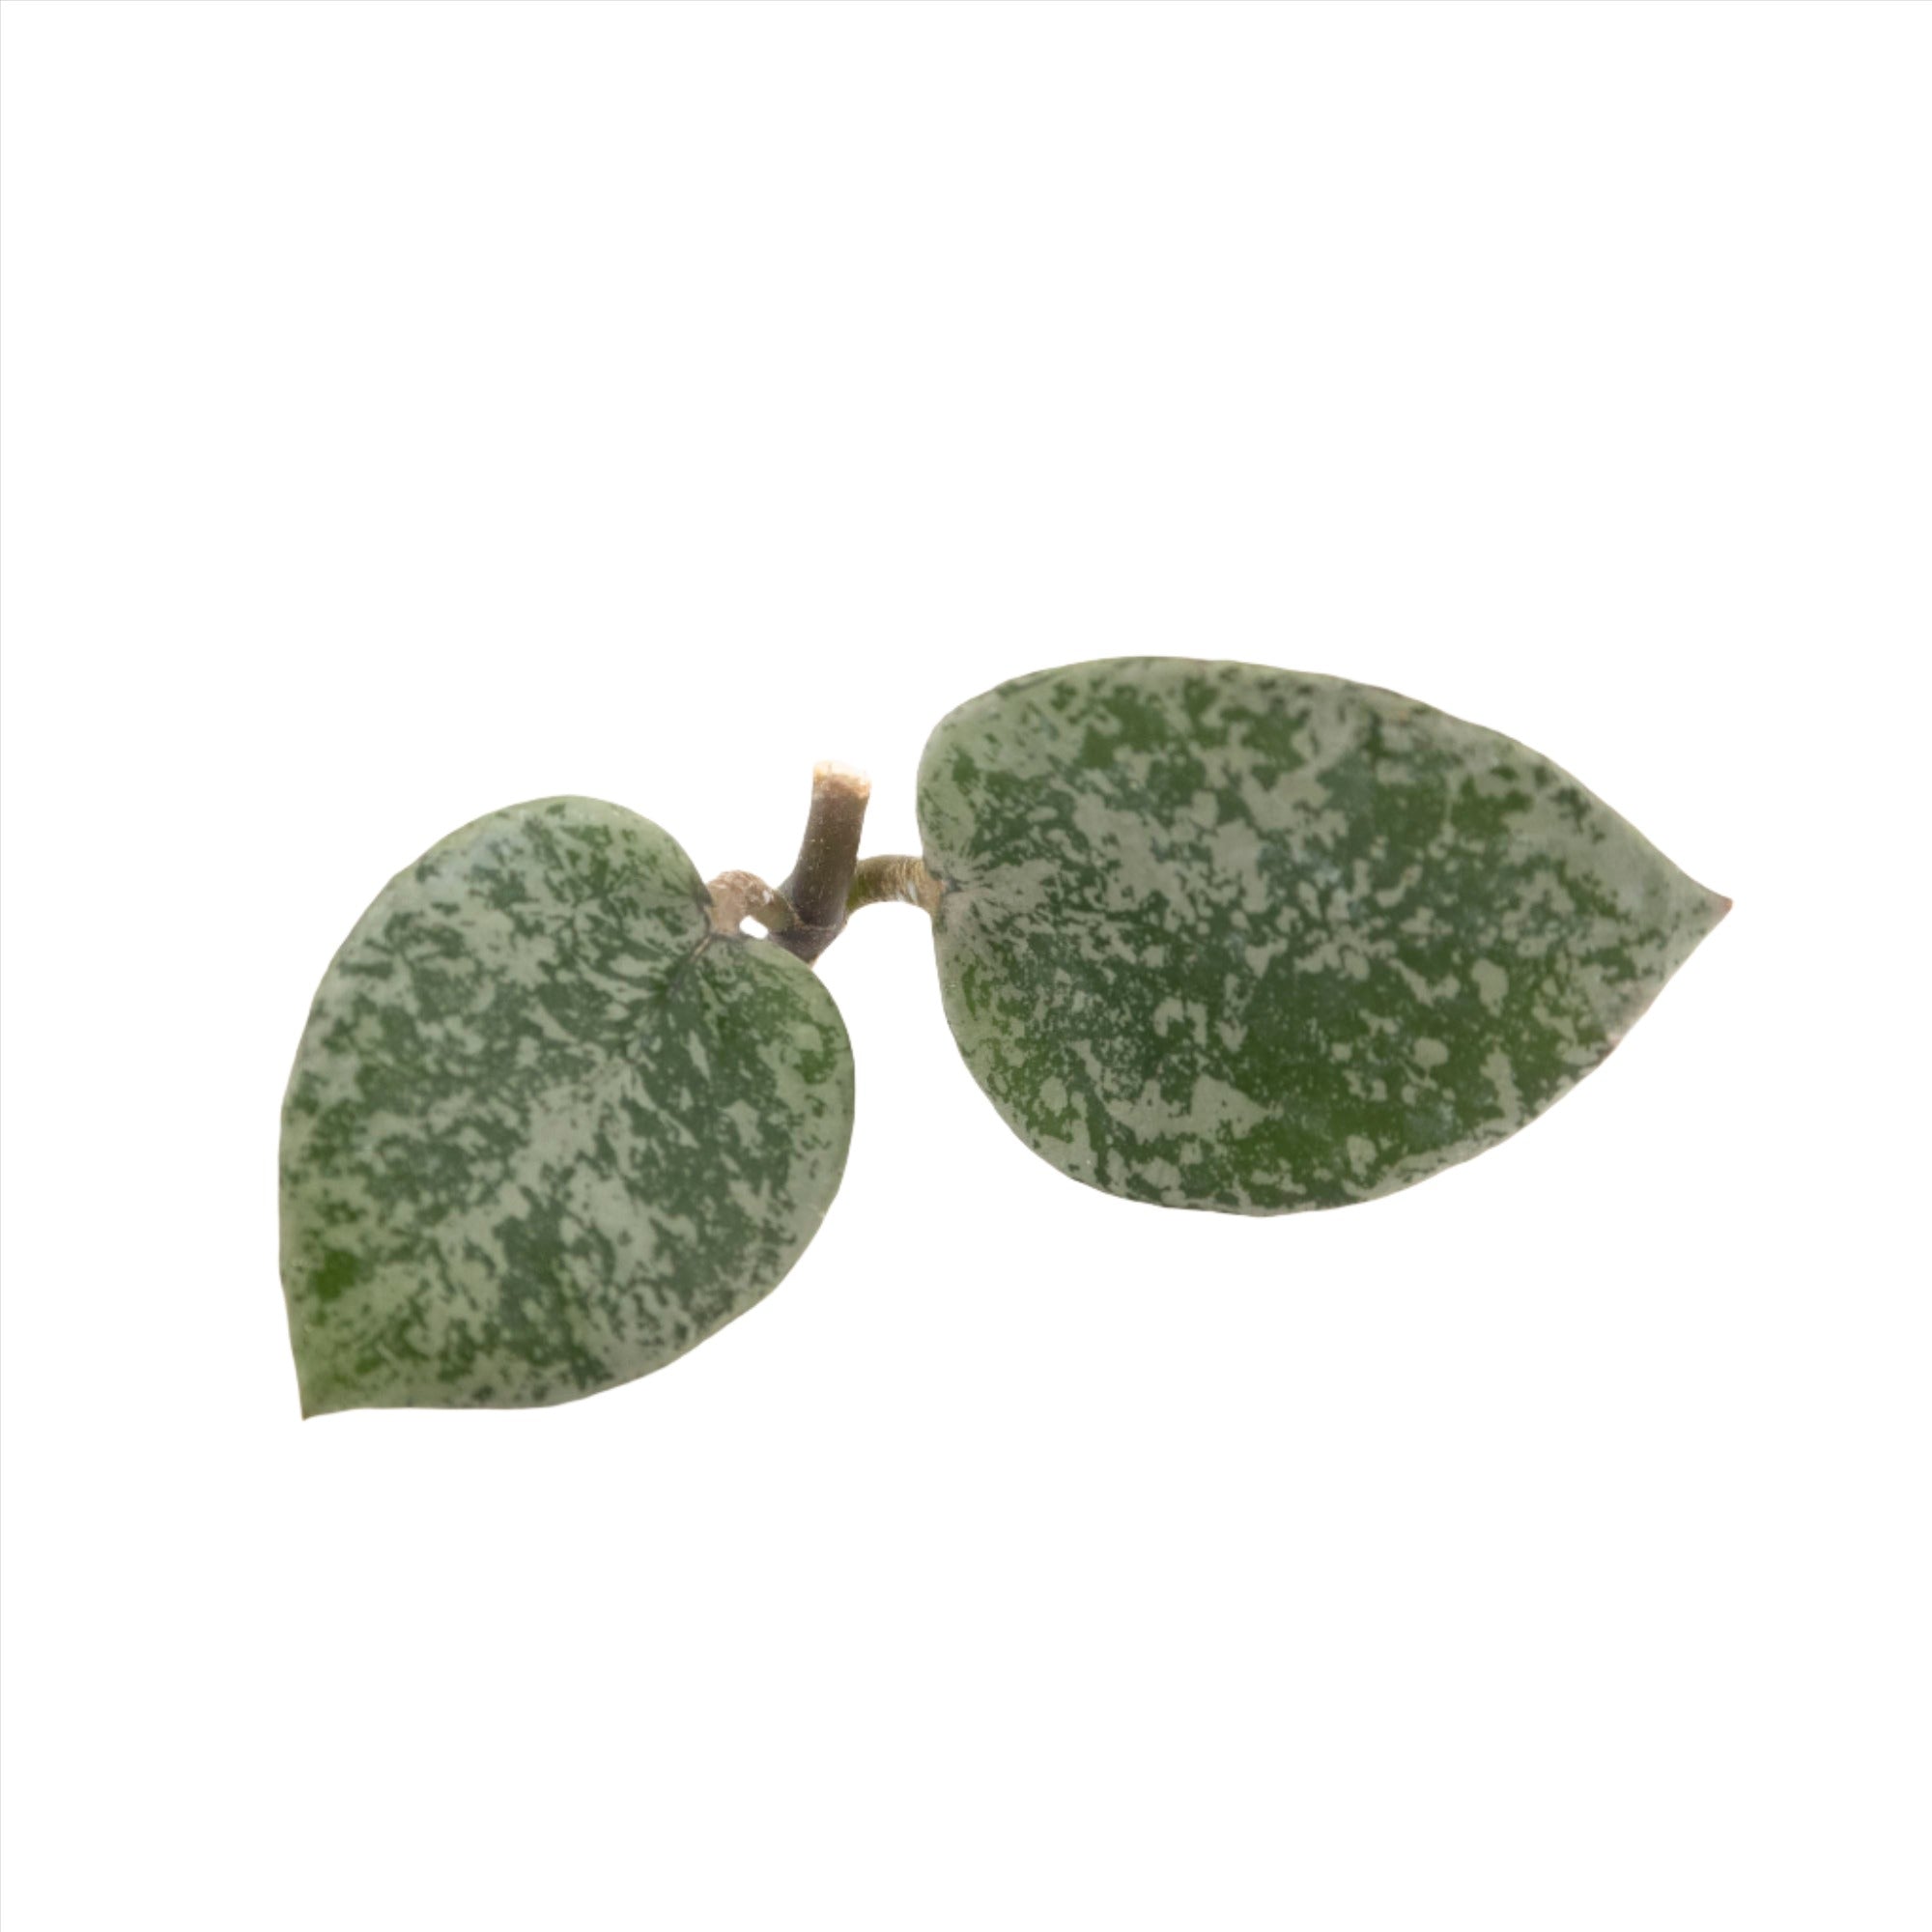 Unrooted cutting of Hoya Lacunosa Gayung